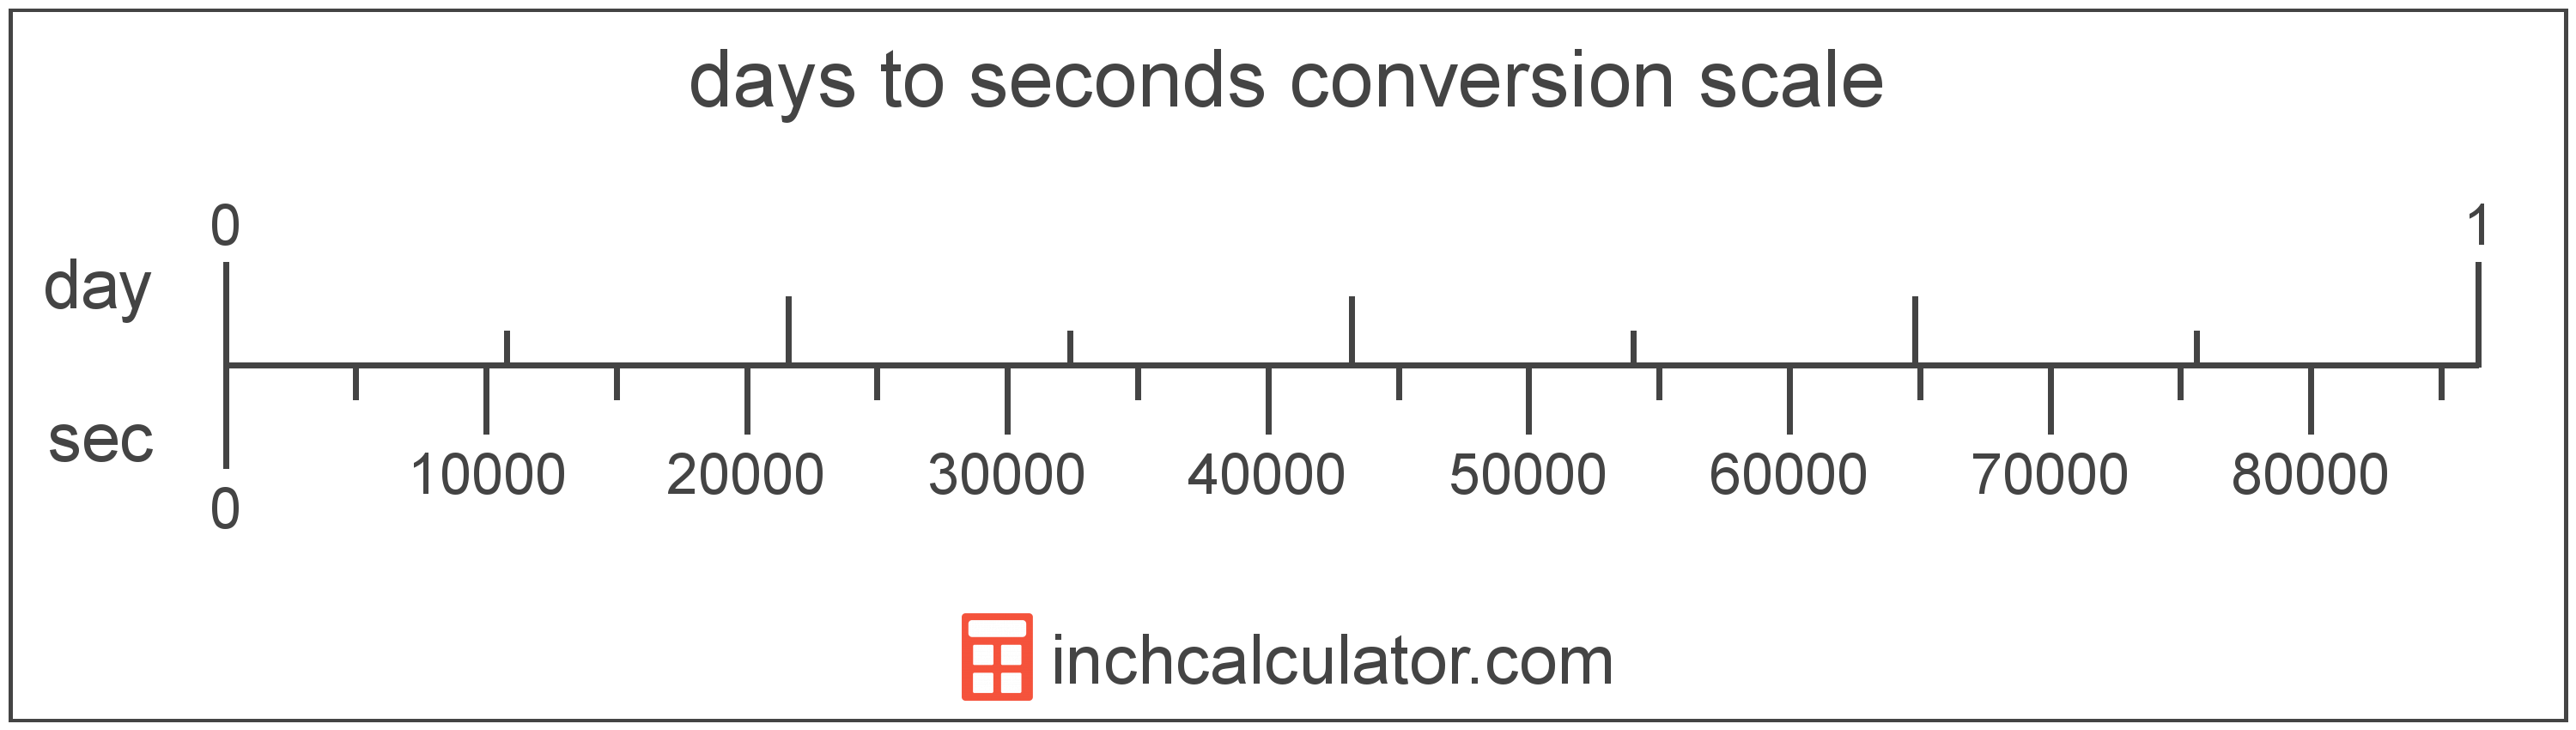 Days to Seconds Conversion (day to sec) - Inch Calculator